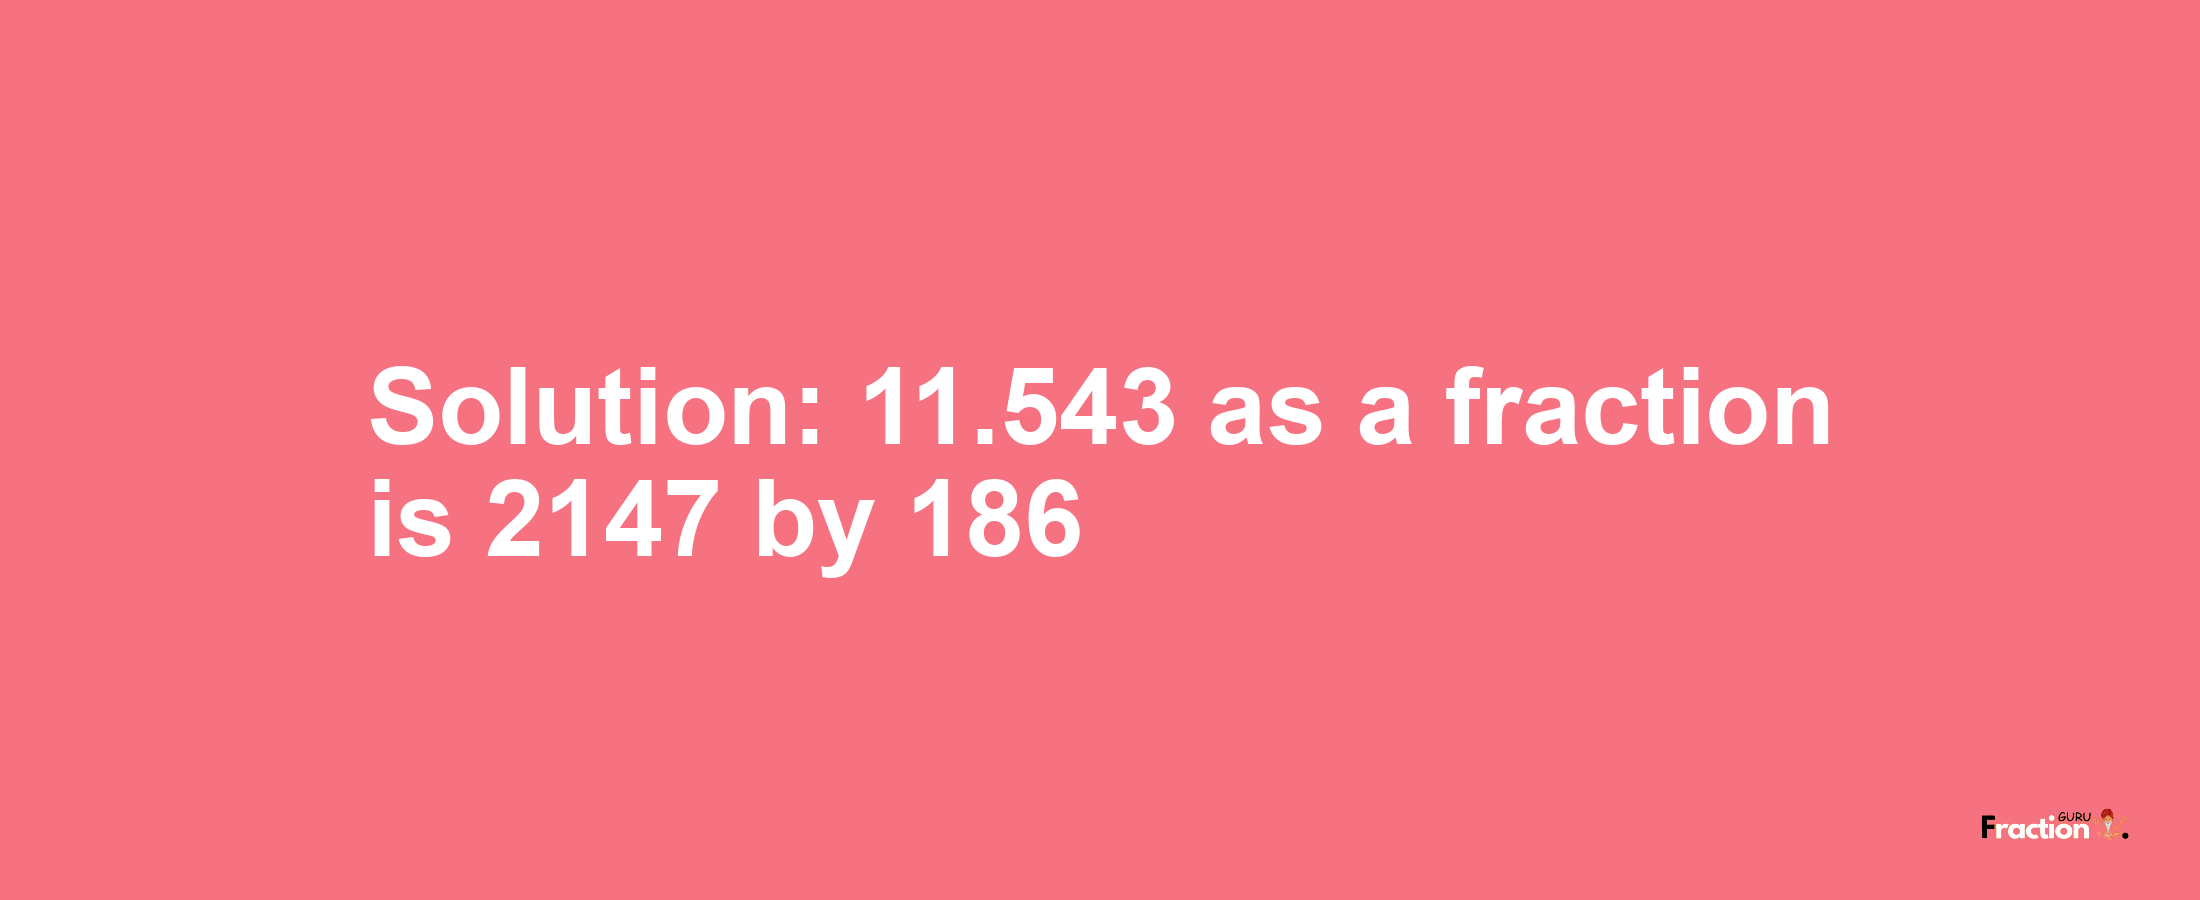 Solution:11.543 as a fraction is 2147/186